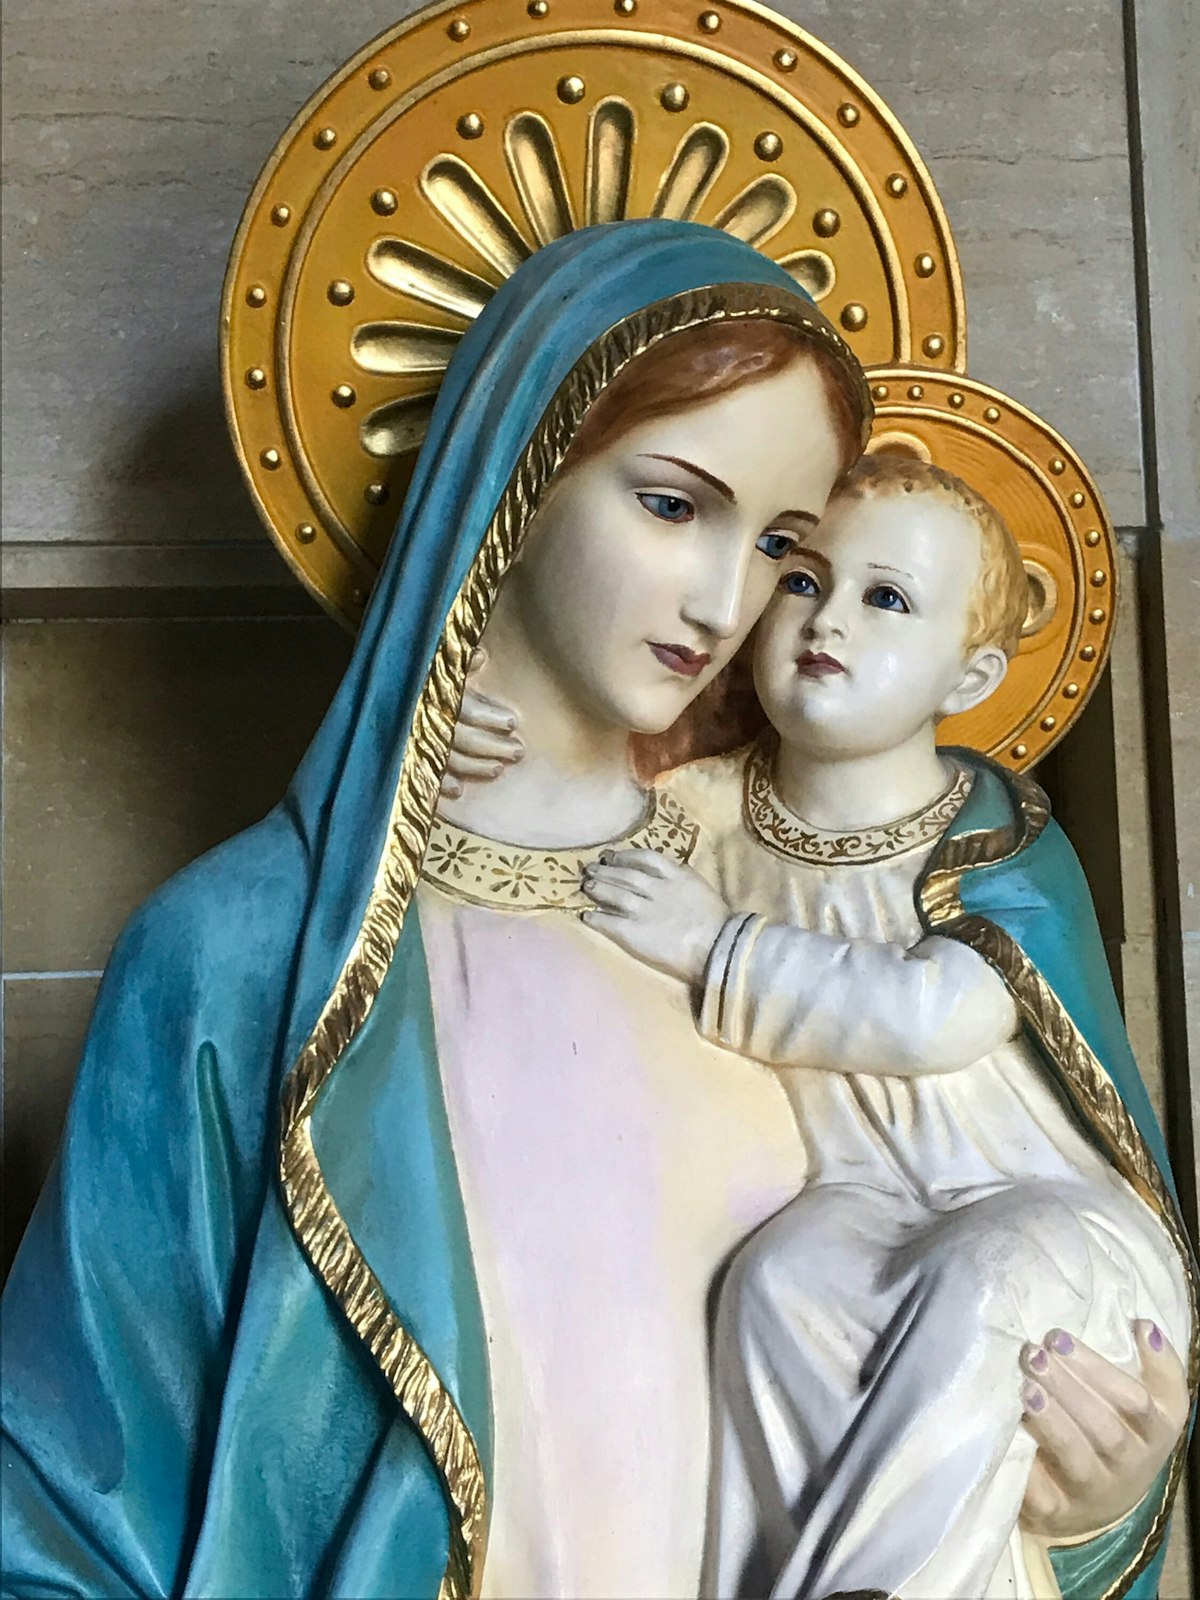 A statue of the Blessed Virgin Mary holding the Christ Child, pictured, was destroyed Mach 8 when a man broke into the parish vestibule. (Courtesy of St. Mary Parish)